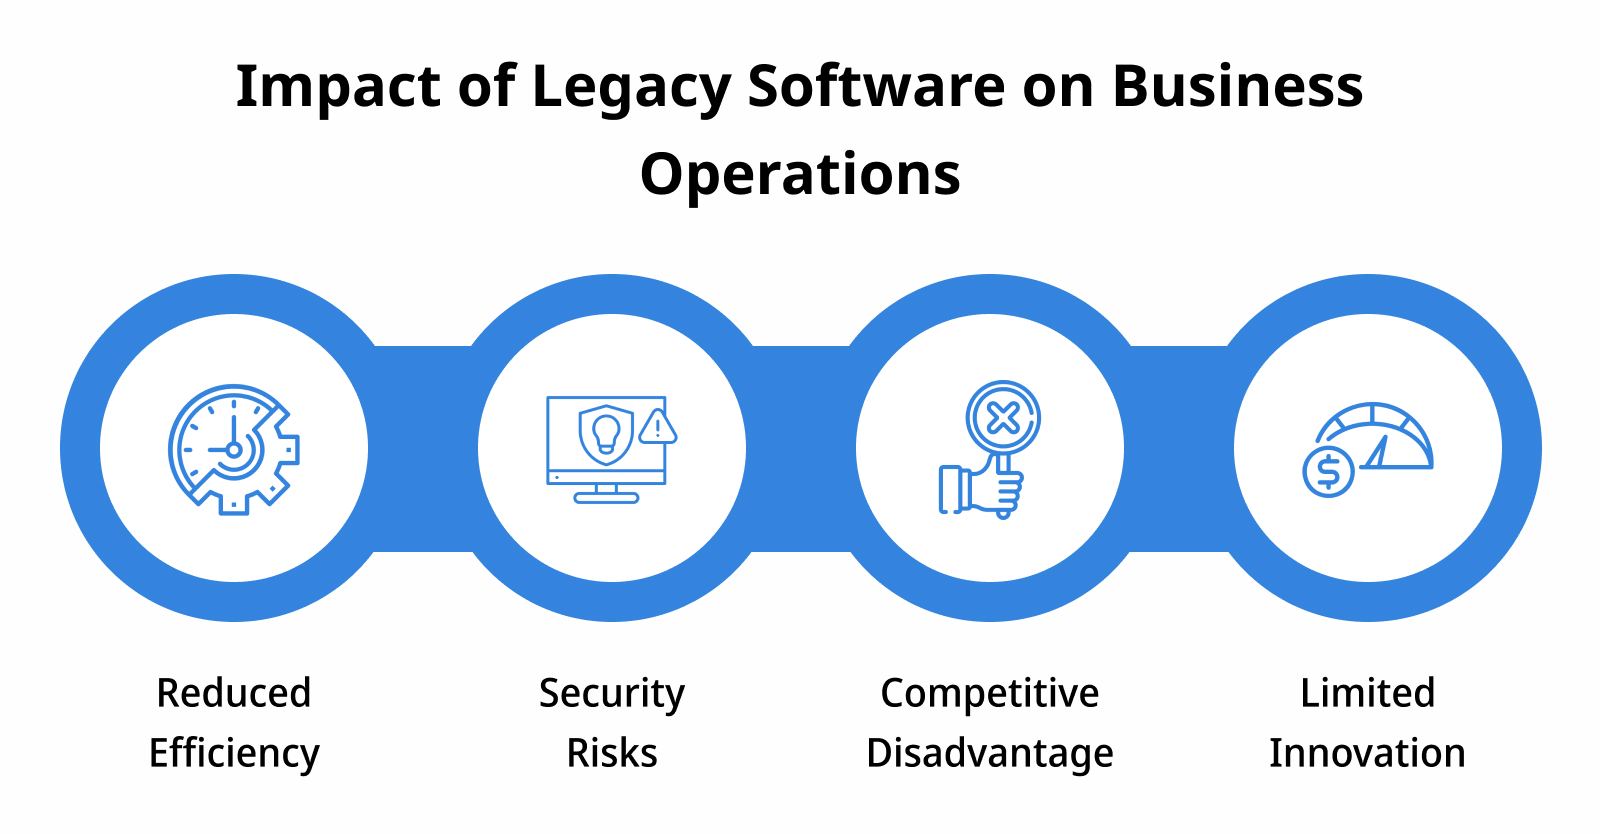 Impact of Legacy Software on Business Operations